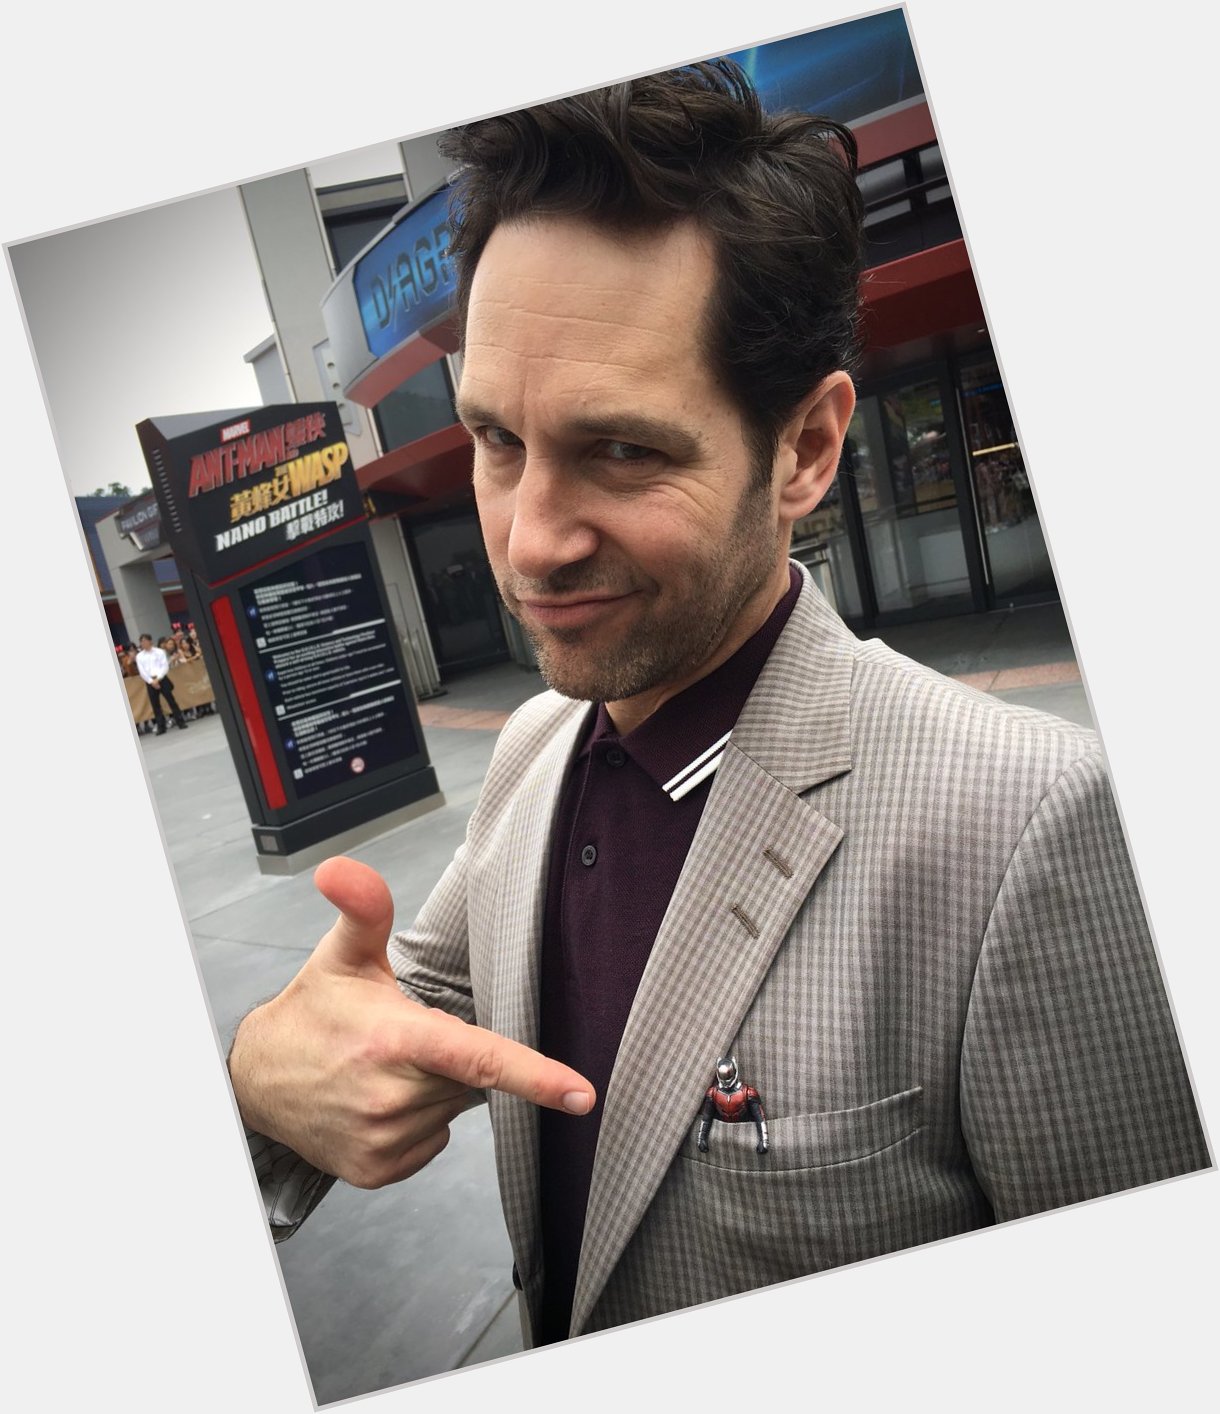 Please join me in wishing a very Happy Birthday to your  and mine - Mr. Paul Rudd! 